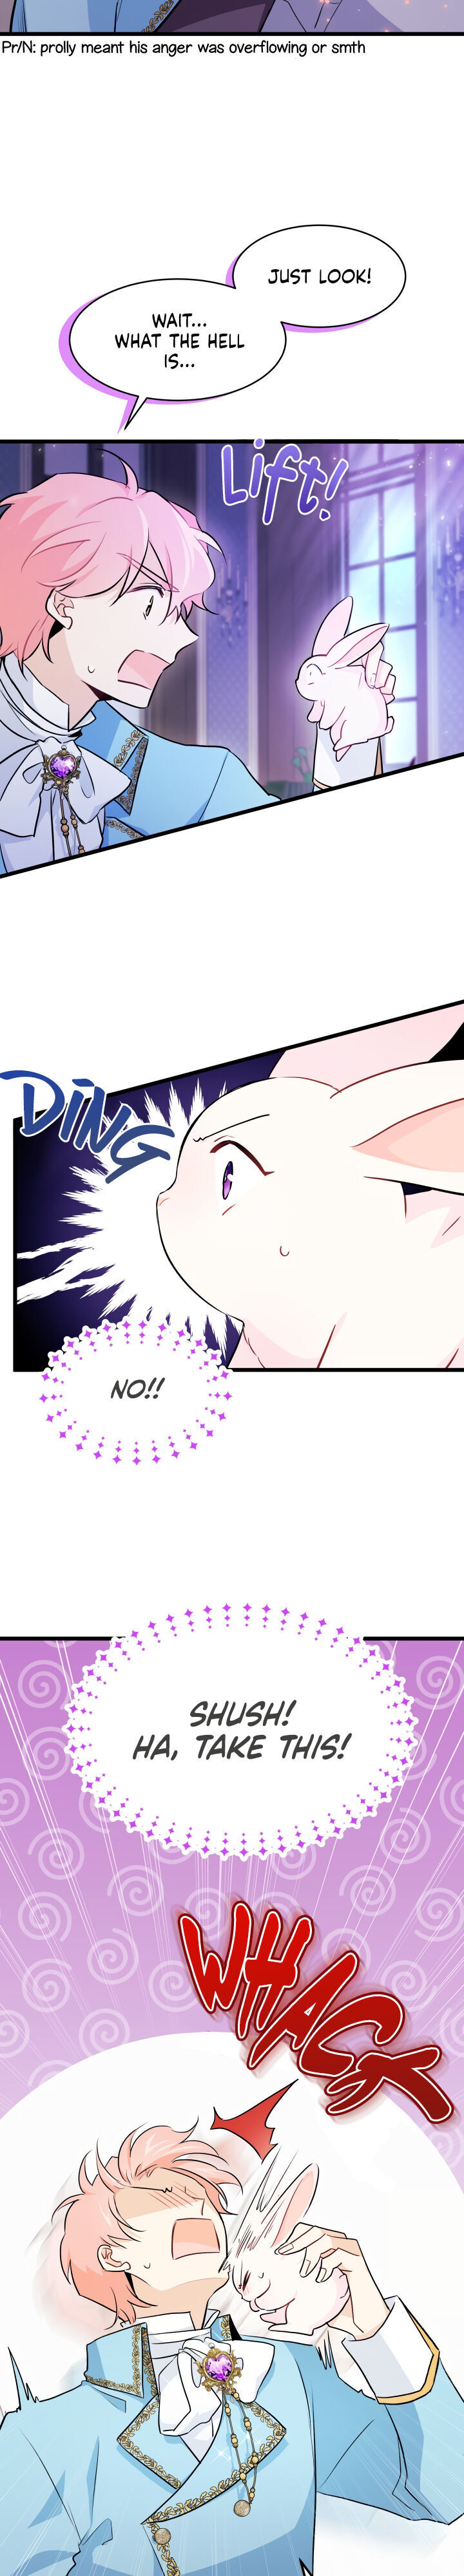 A Symbiotic Relationship Between A Rabbit And A Black Panther - Chapter 21 Page 13